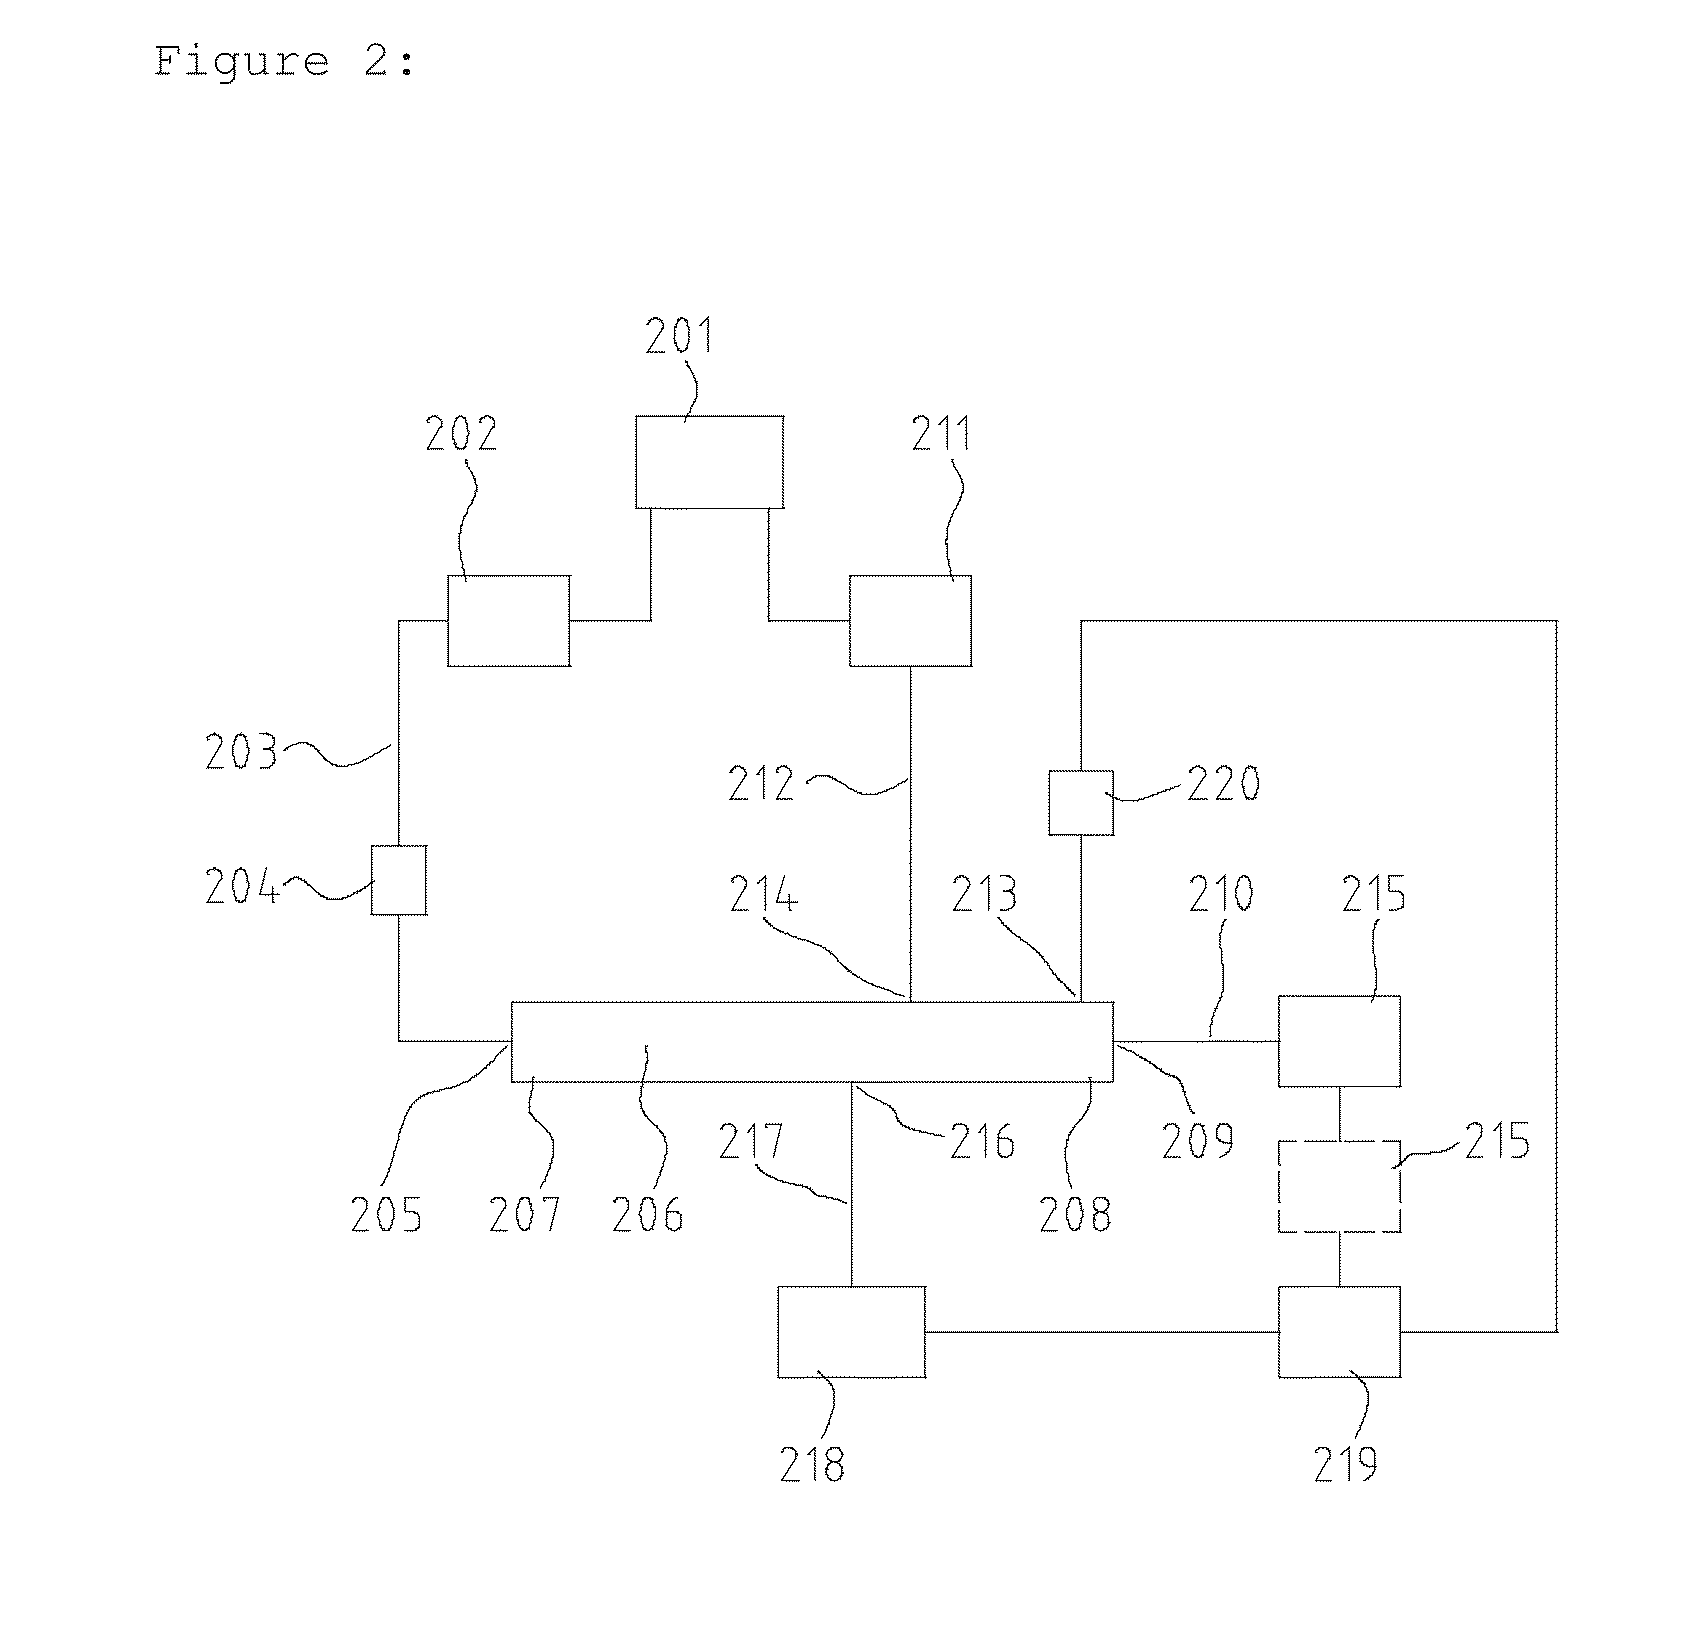 Apparatus for Field-Flow Fractionation